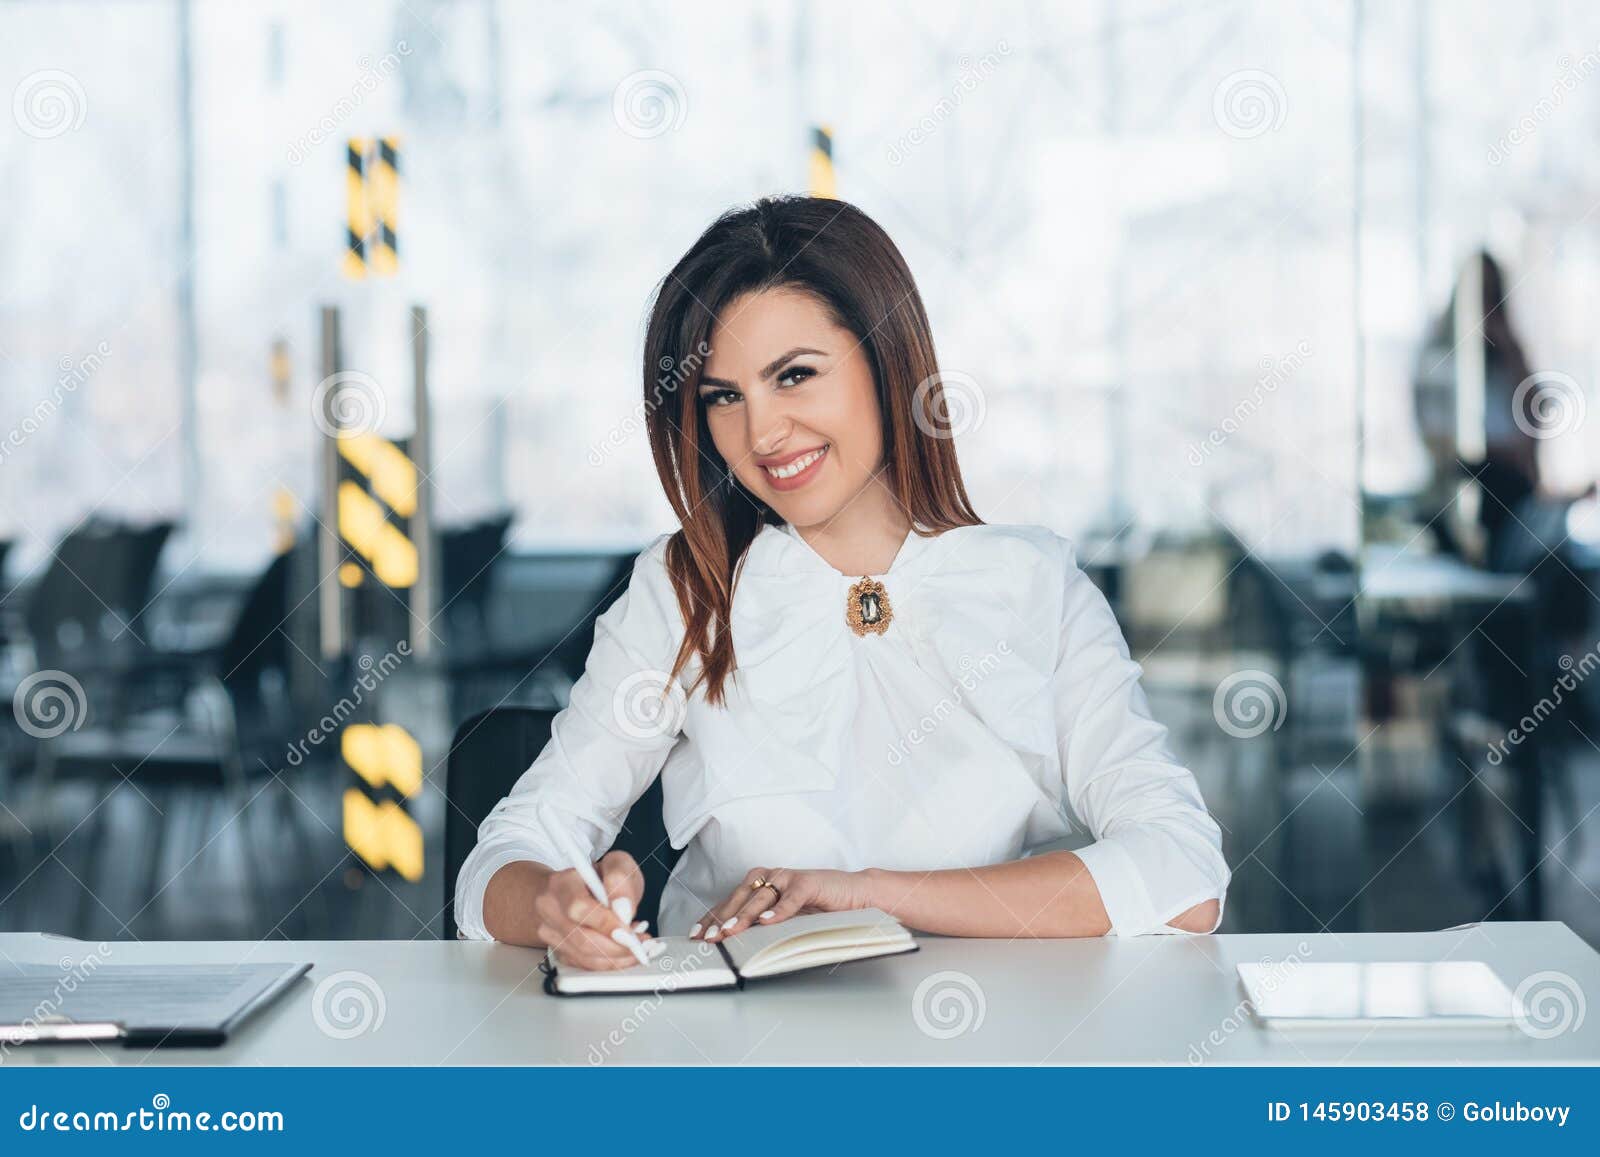 Business Woman Successful Female Team Leader Stock Photo Image